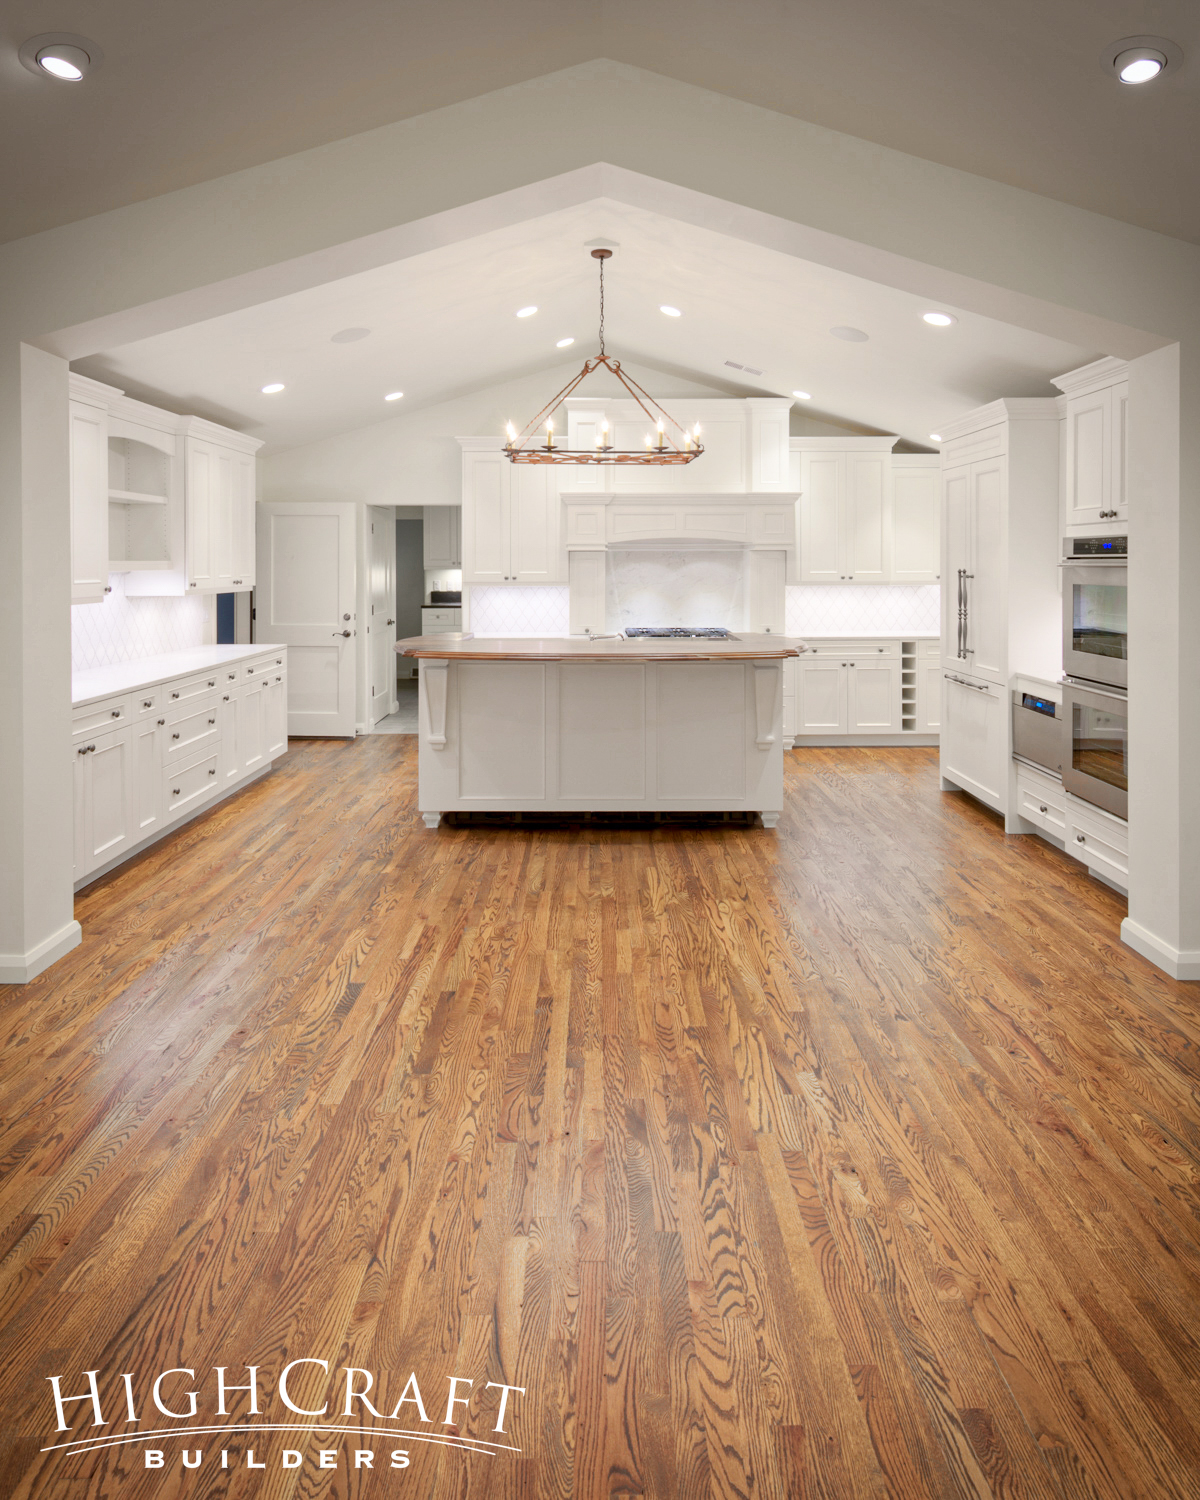 Kitchen-And-Great-Room-Addition-Oak-Flooring-White-Cabinets-Transitional-Island-Chandelier